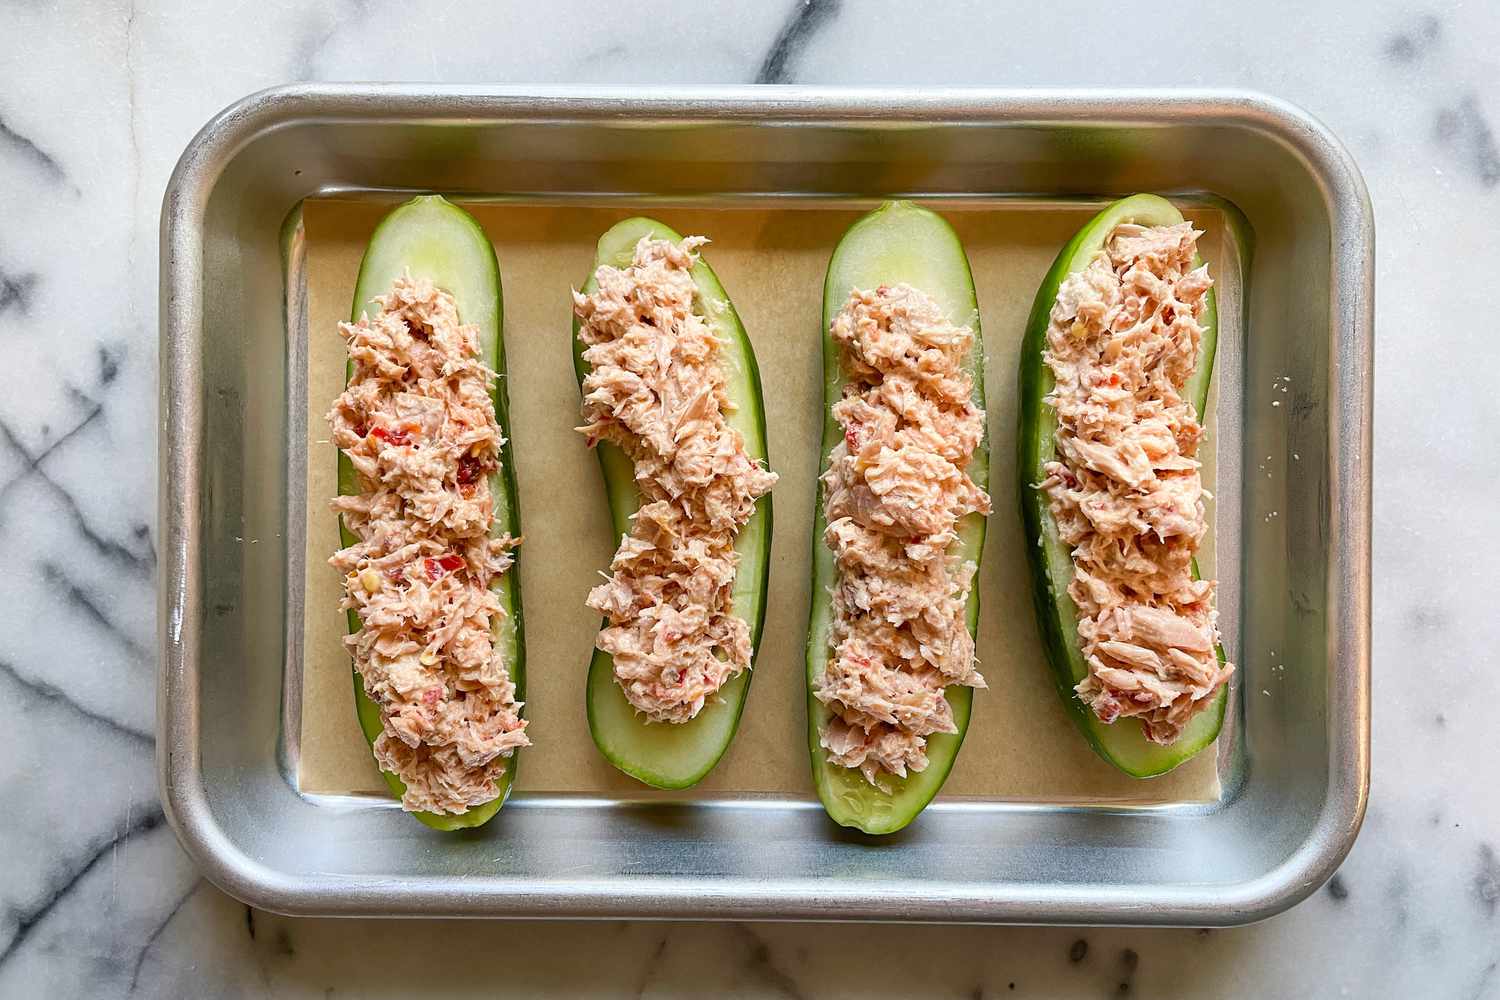 Halved cucumbers sitting on a small sheet pan with now-pink tuna filling stuffed inside